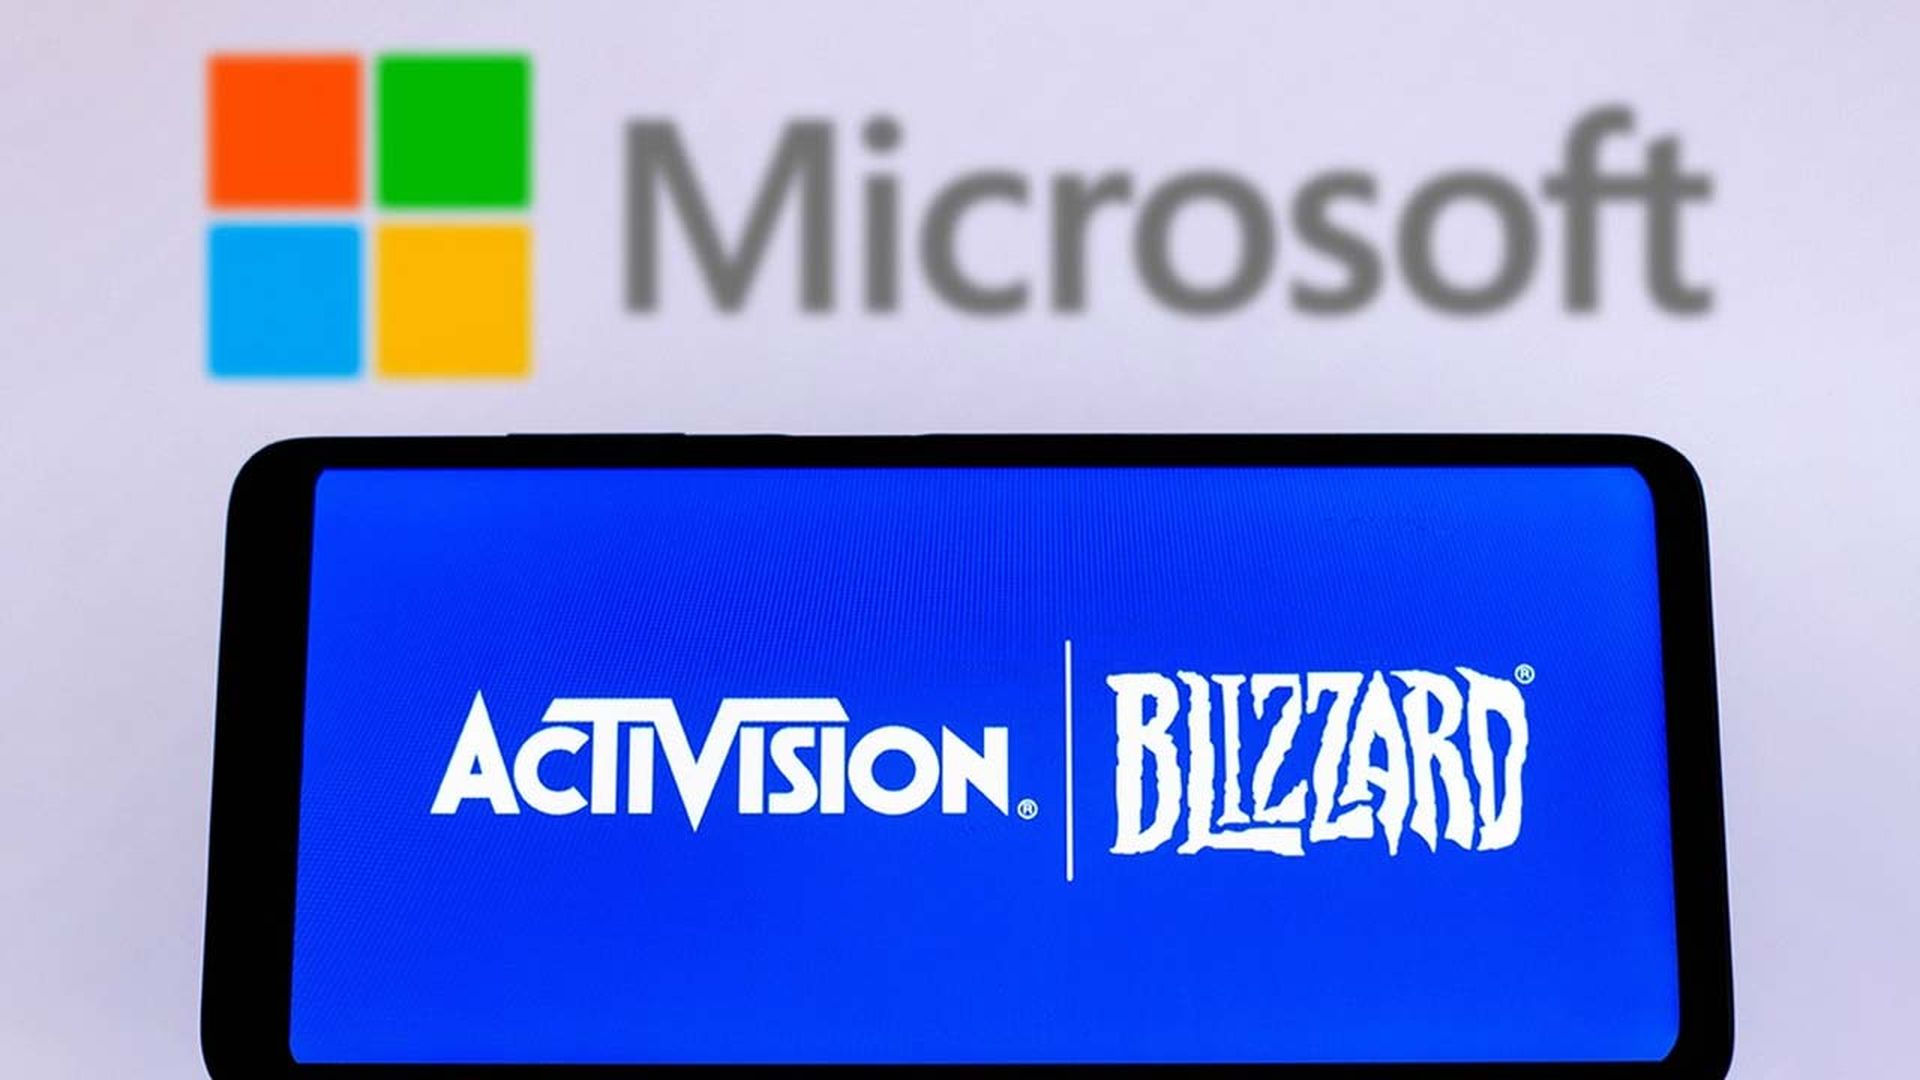 Following the closure of the Microsoft Activision deal, Microsoft's head of gaming Phil Spencer said late Tuesday that the company has "entered into a...